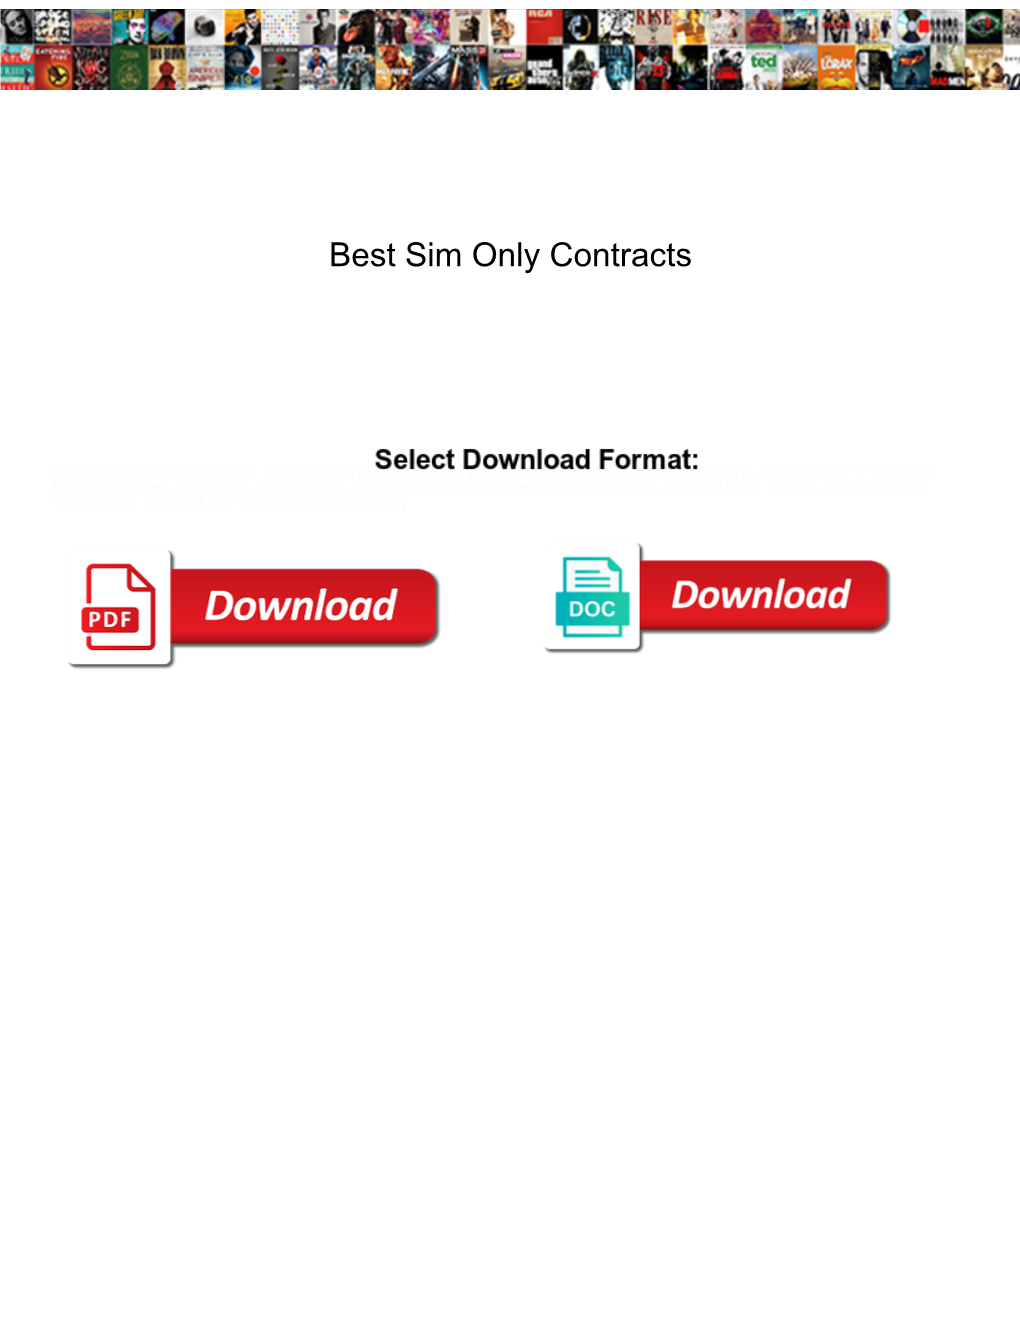 Best Sim Only Contracts